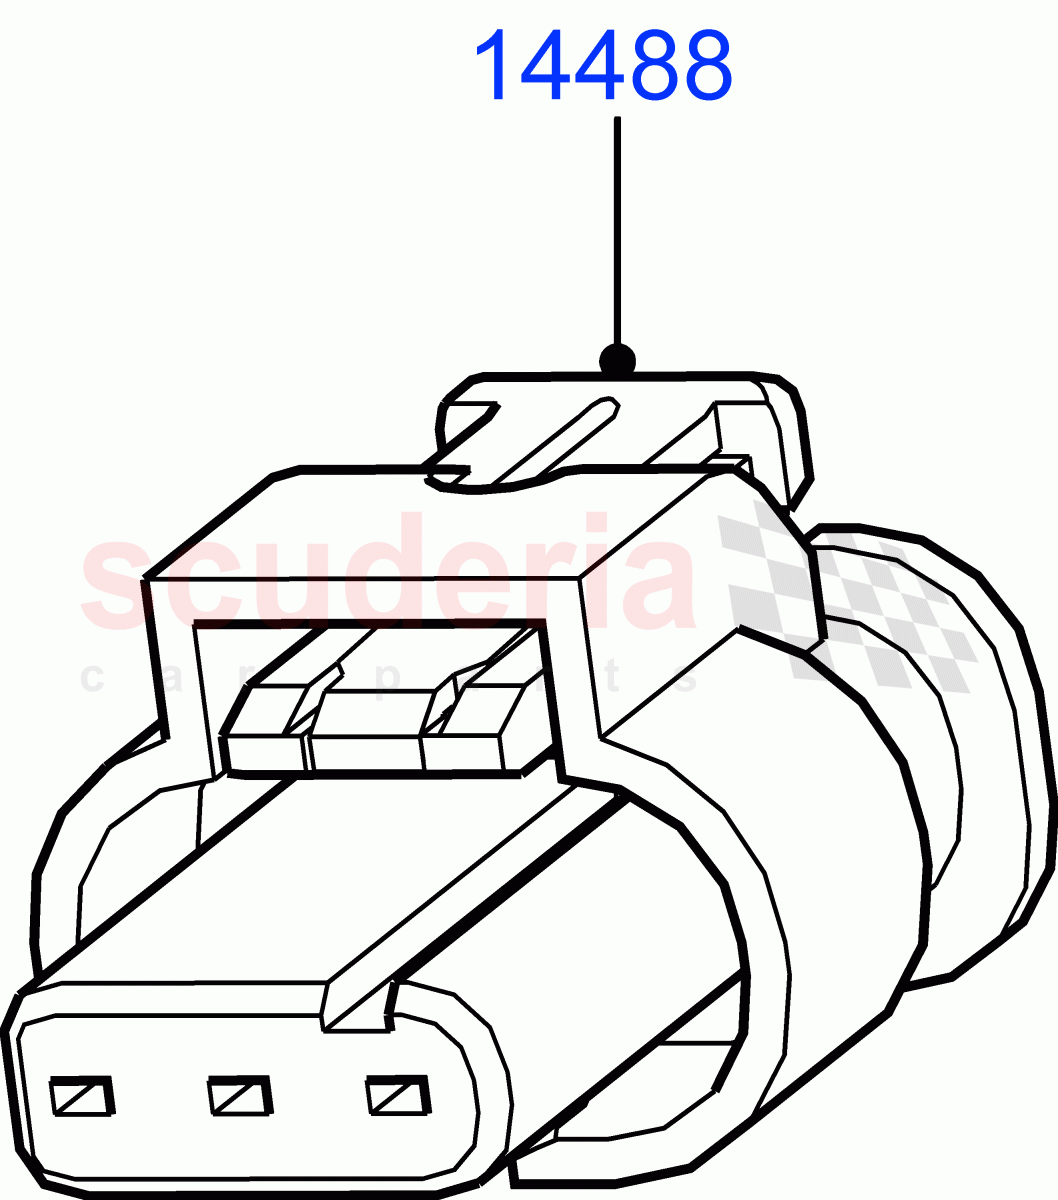 Wiring Connectors(For Part Identification And Location Please Refer To TOPIx)(Changsu (China))((V)FROMEG000001) of Land Rover Land Rover Range Rover Evoque (2012-2018) [2.2 Single Turbo Diesel]